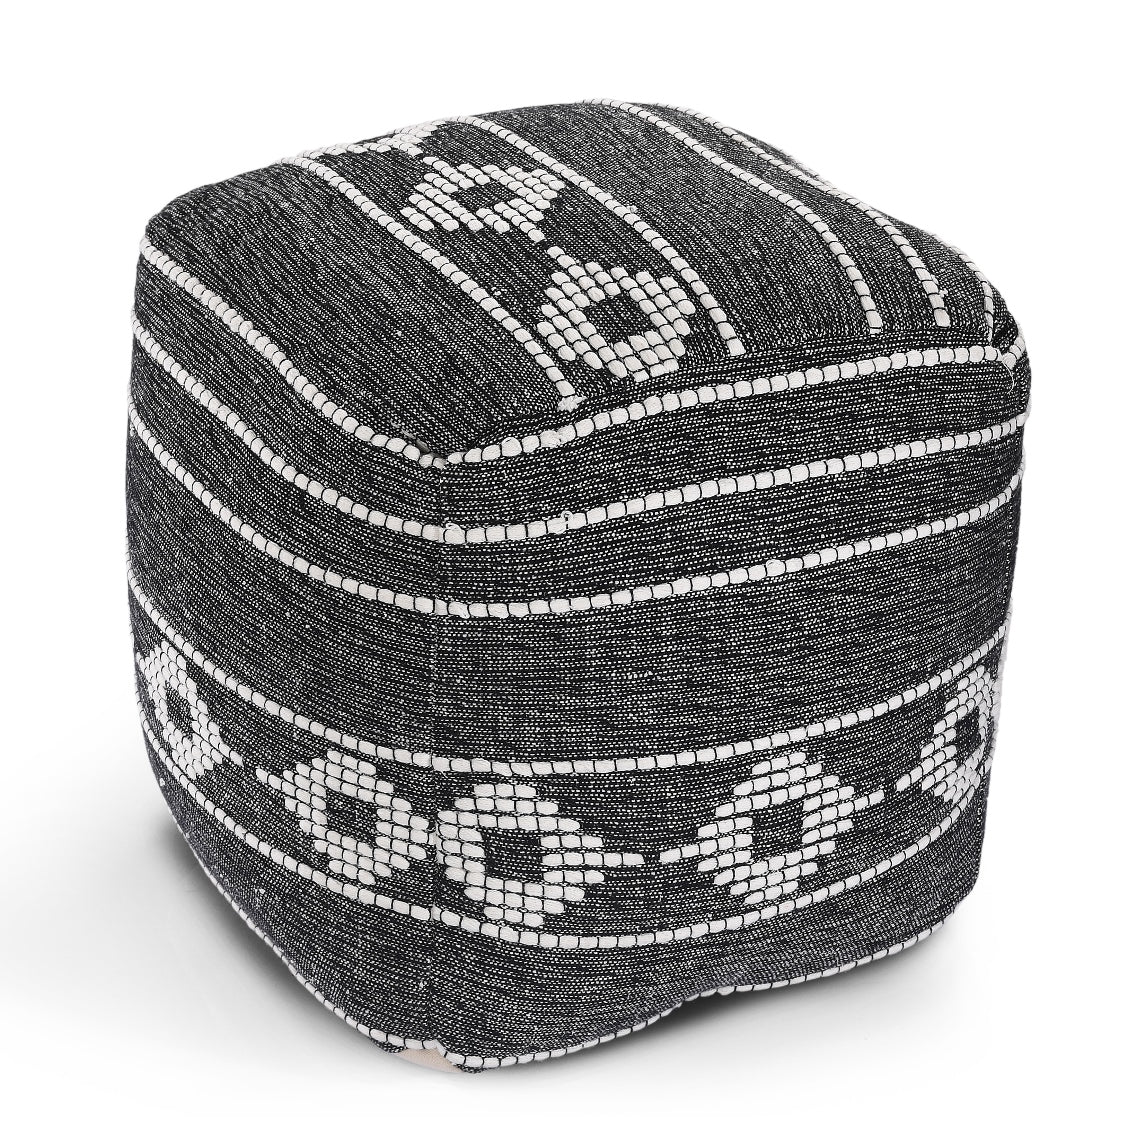 Black & White Knitted Pouf